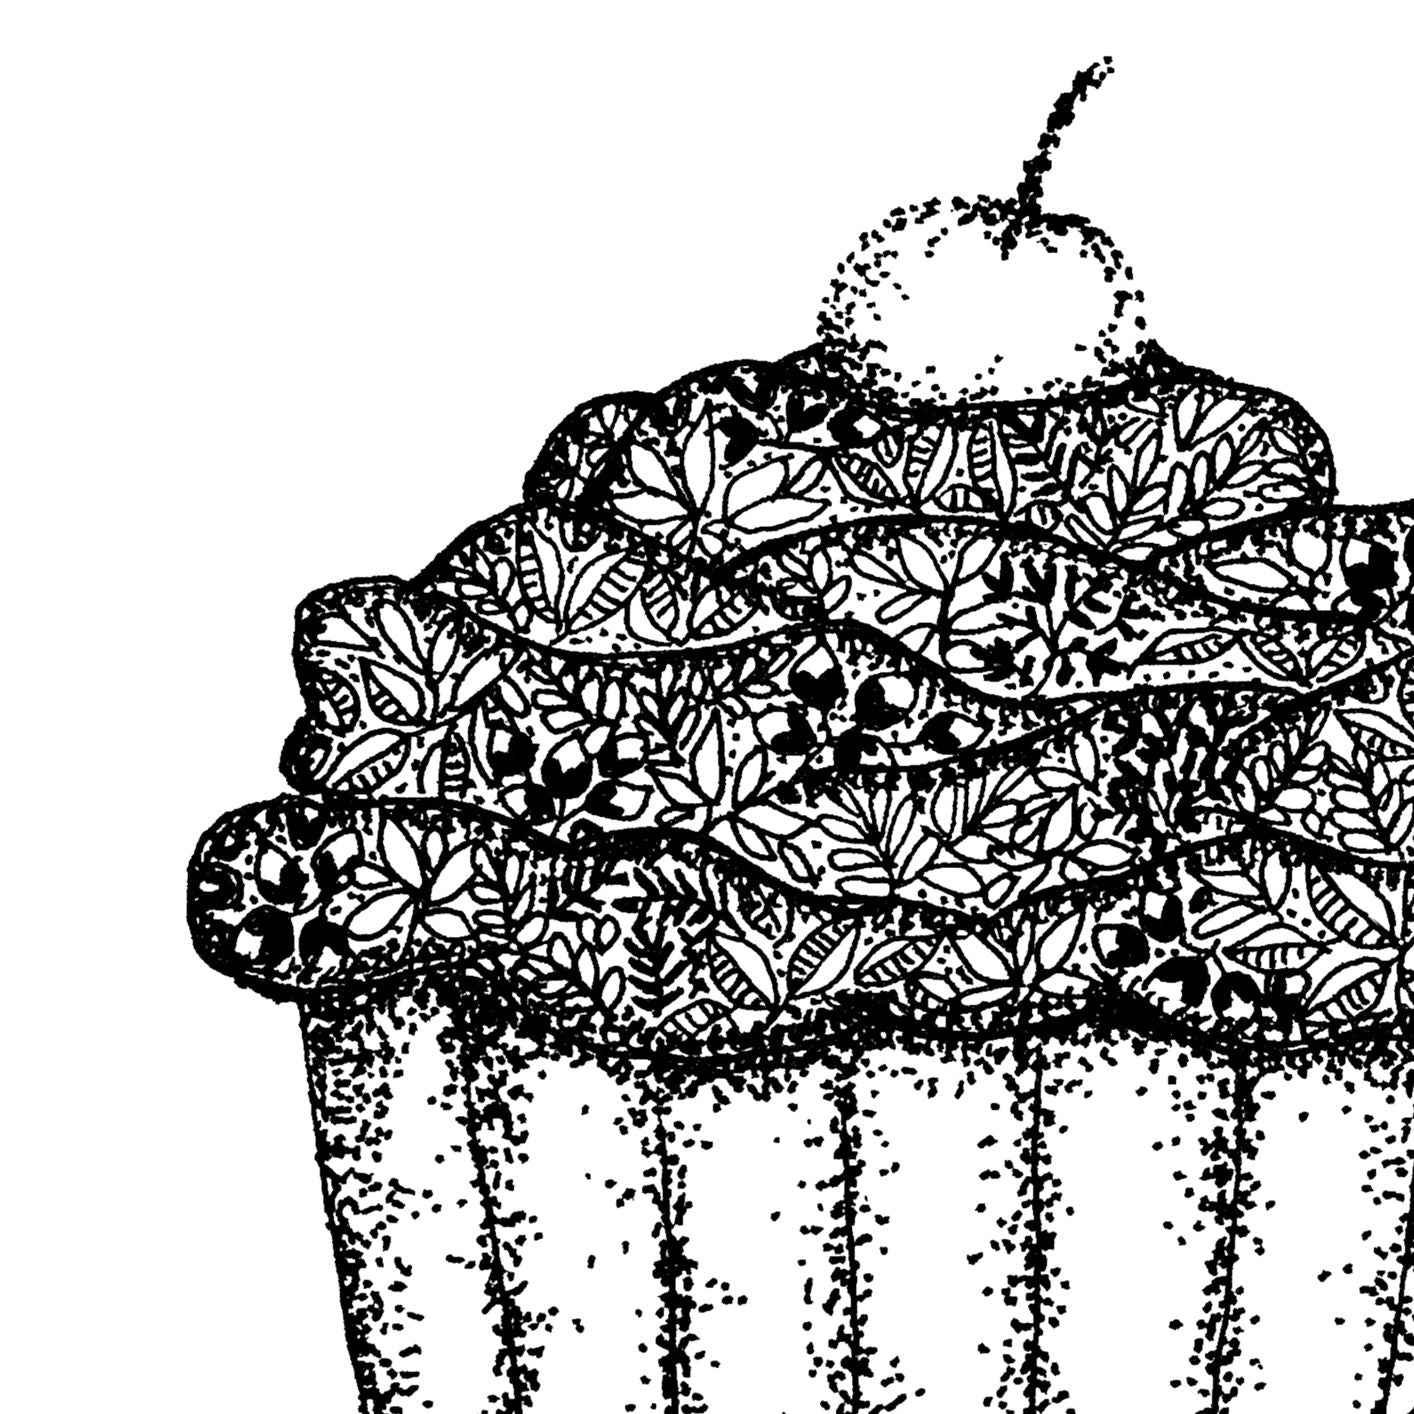 Image shows close up of cupcake illustration drawn from flowers and dots all black and white. image has white background and has great detail shown from the dots and coloured in flowers.